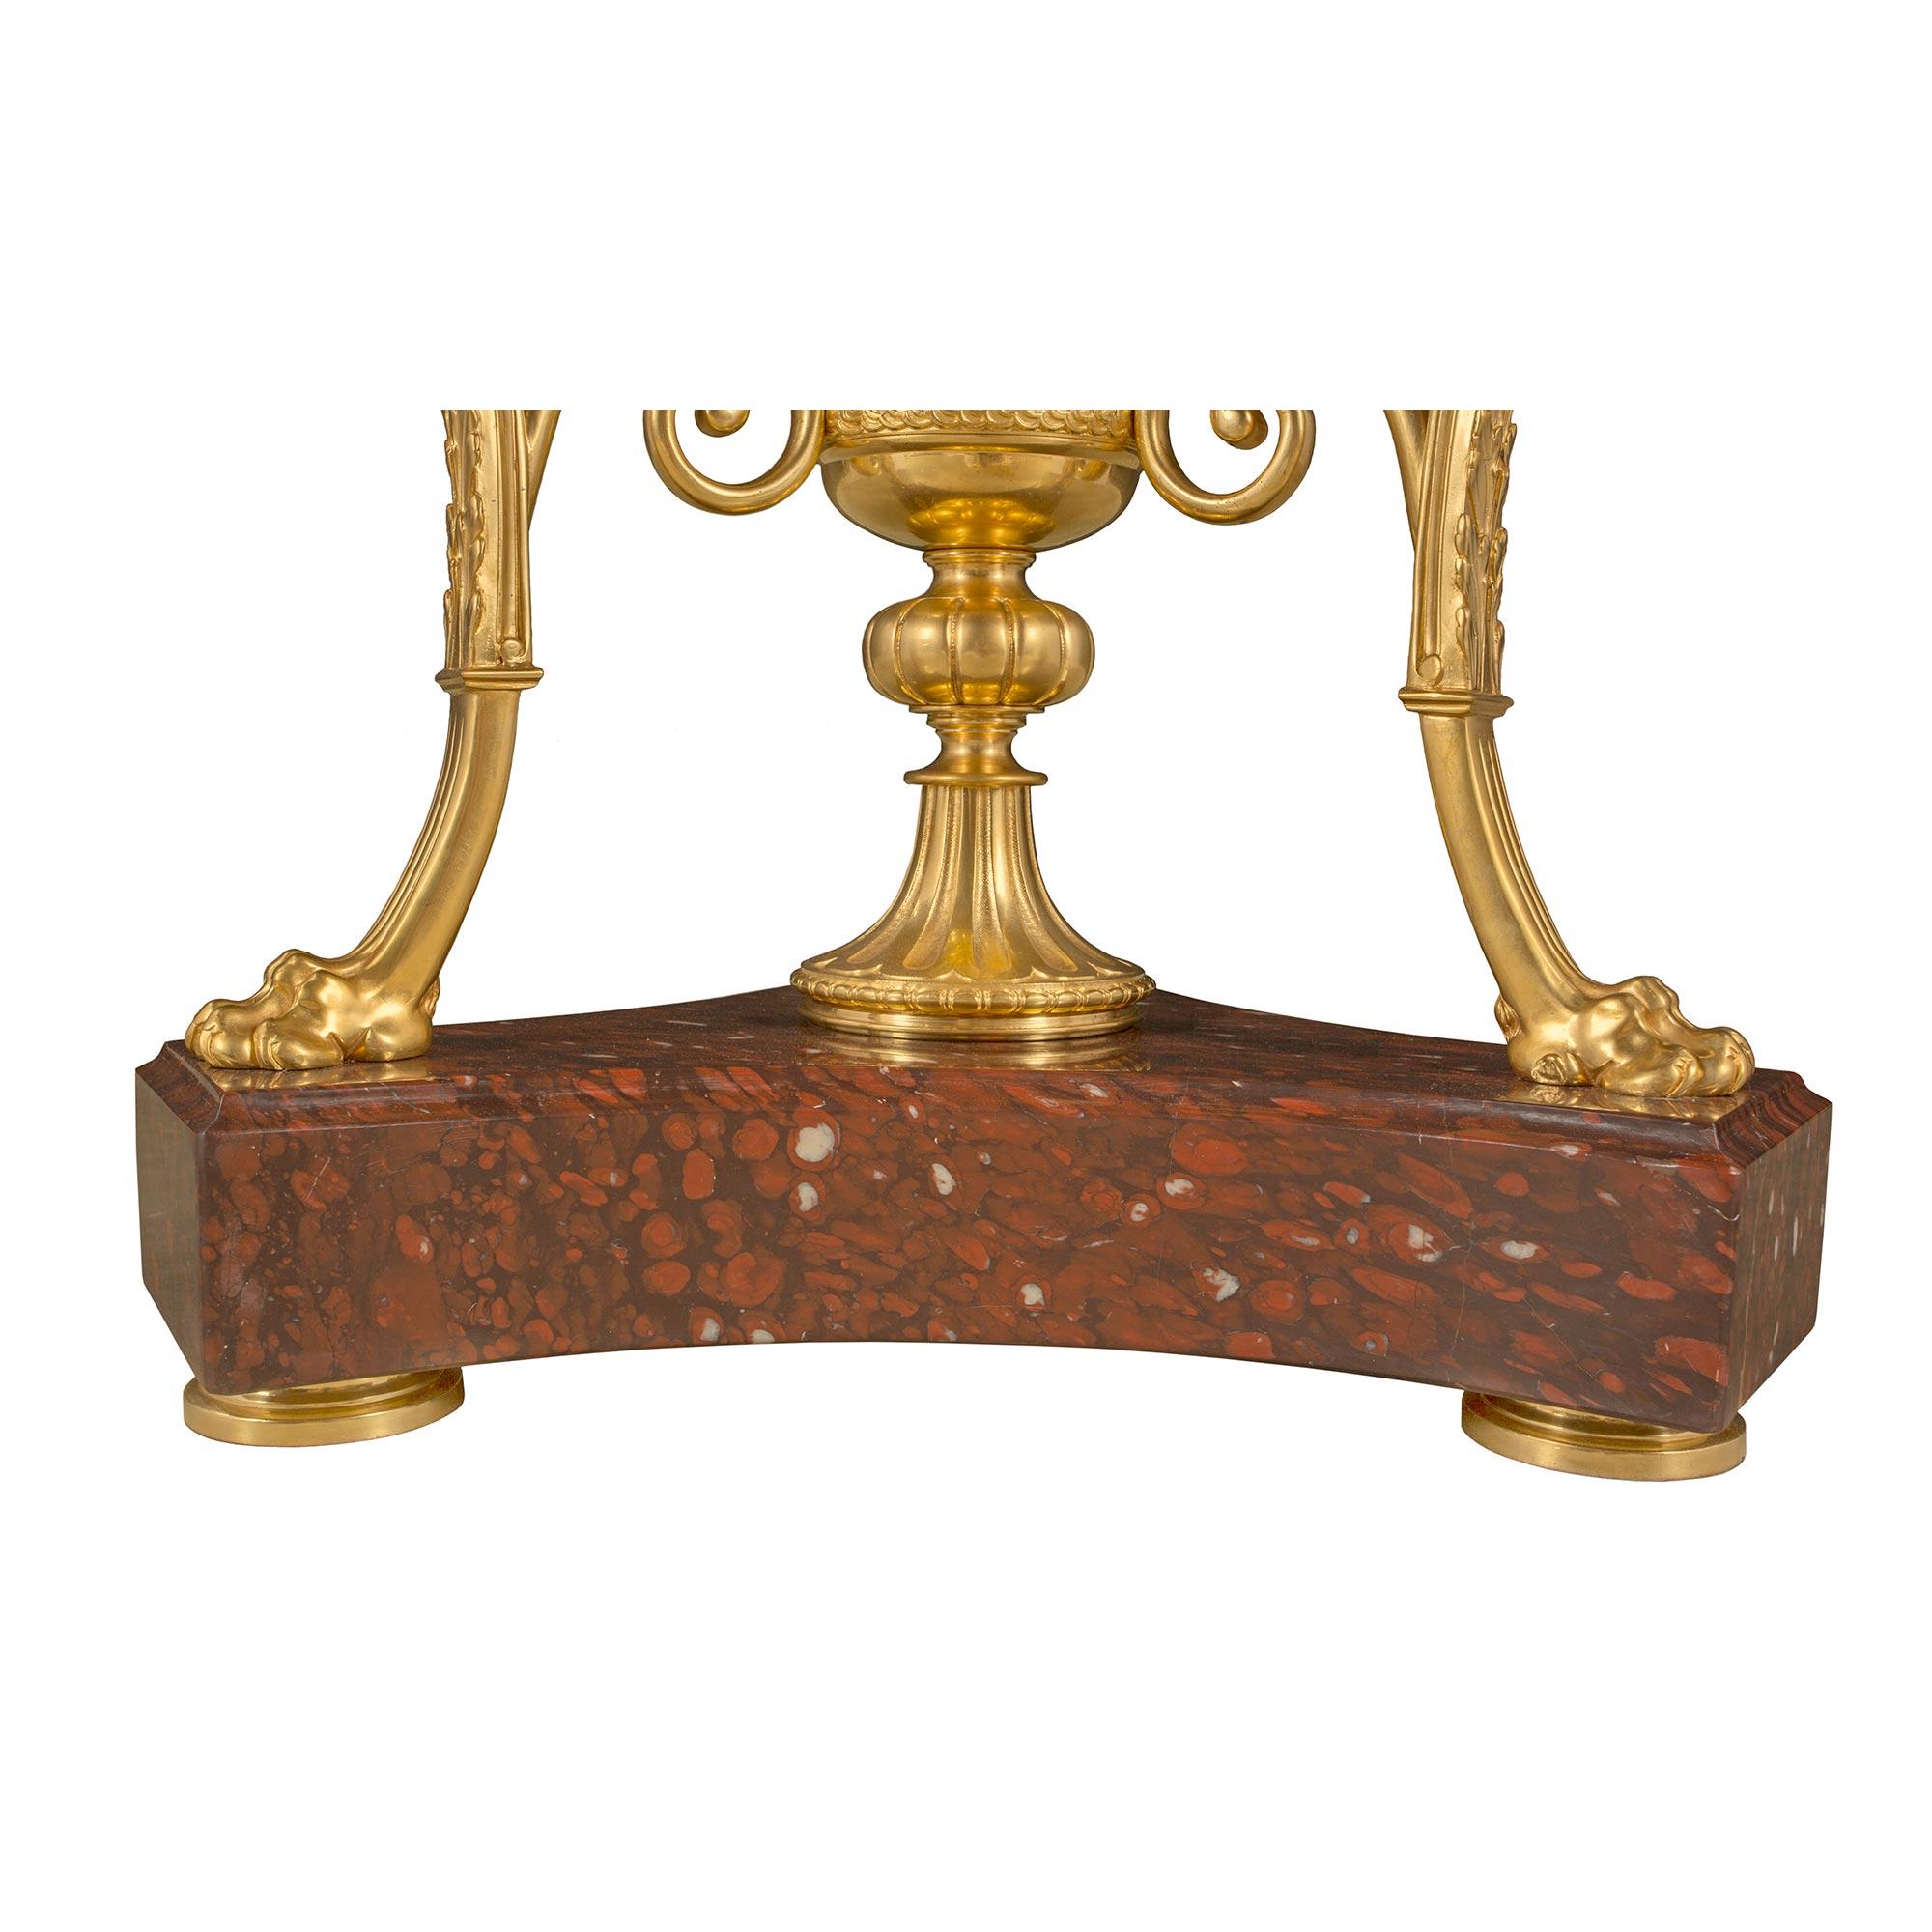 French 19th Century Neoclassical Style Ormolu and Griotte Marble Center Table For Sale 5